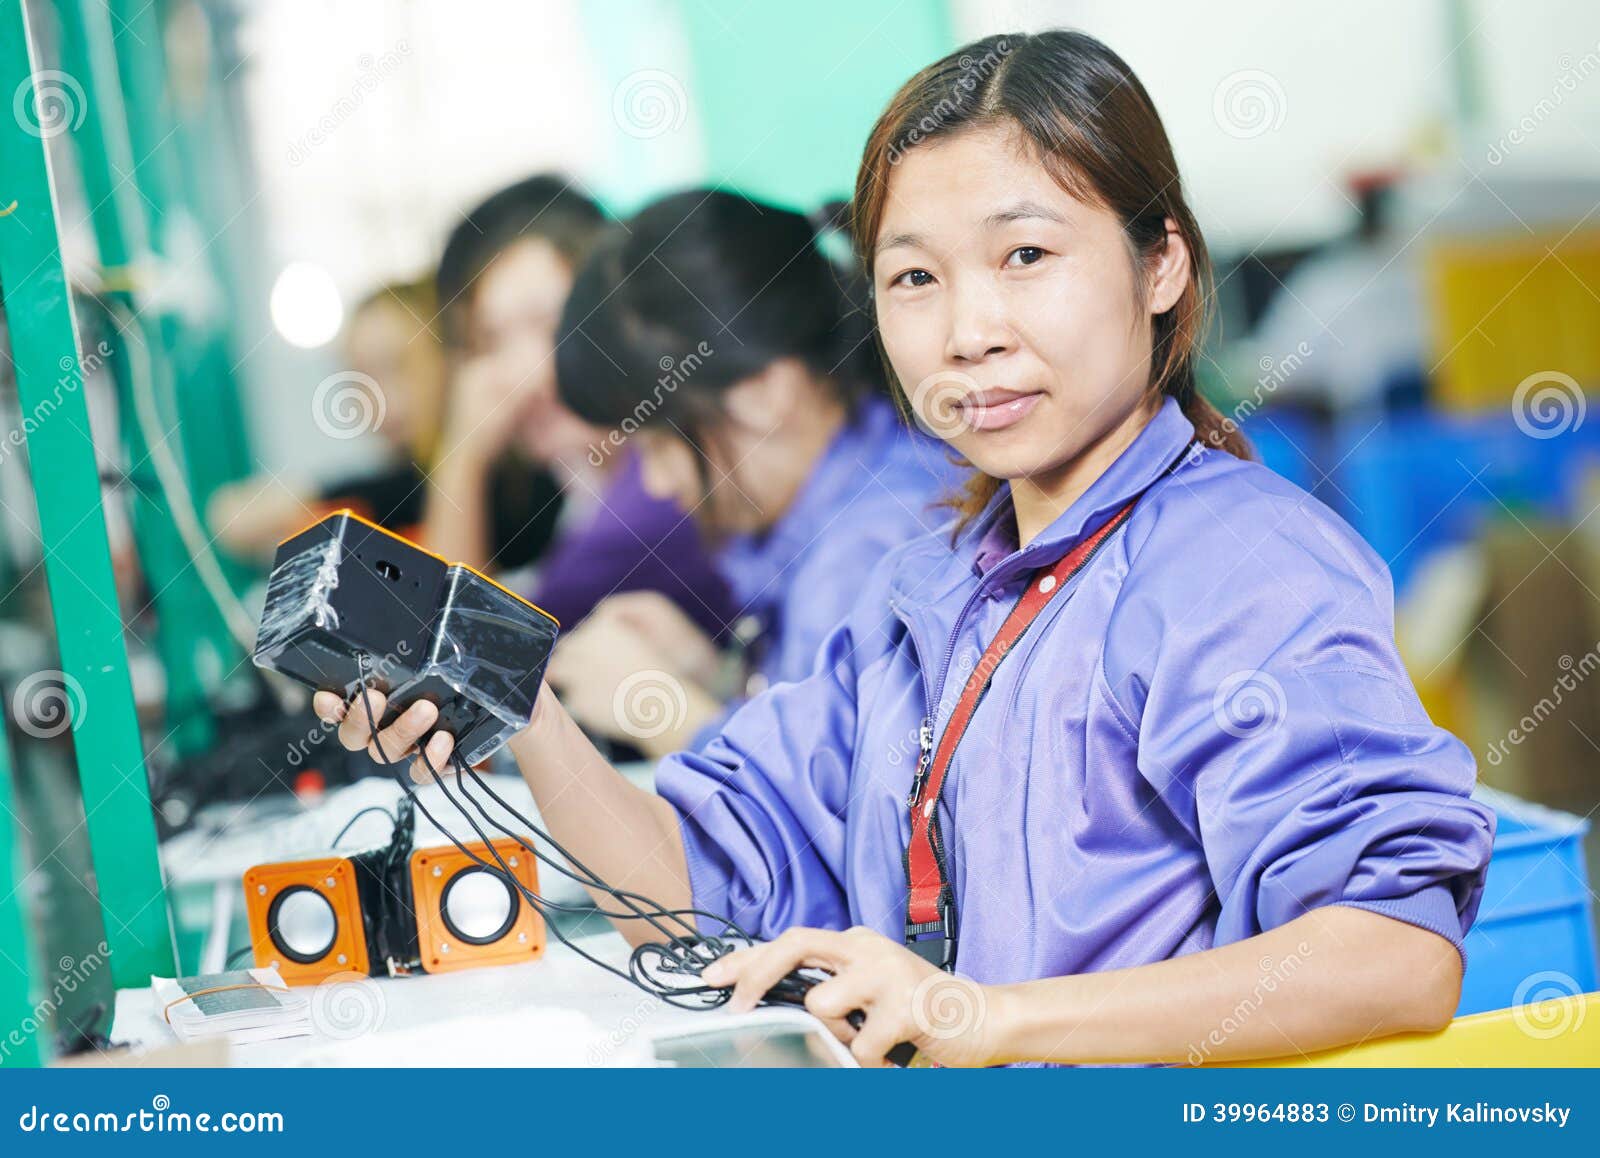 chinese-female-worker-manufacturing-one-assembling-production-line-conveyor-china-factory-39964883.jpg